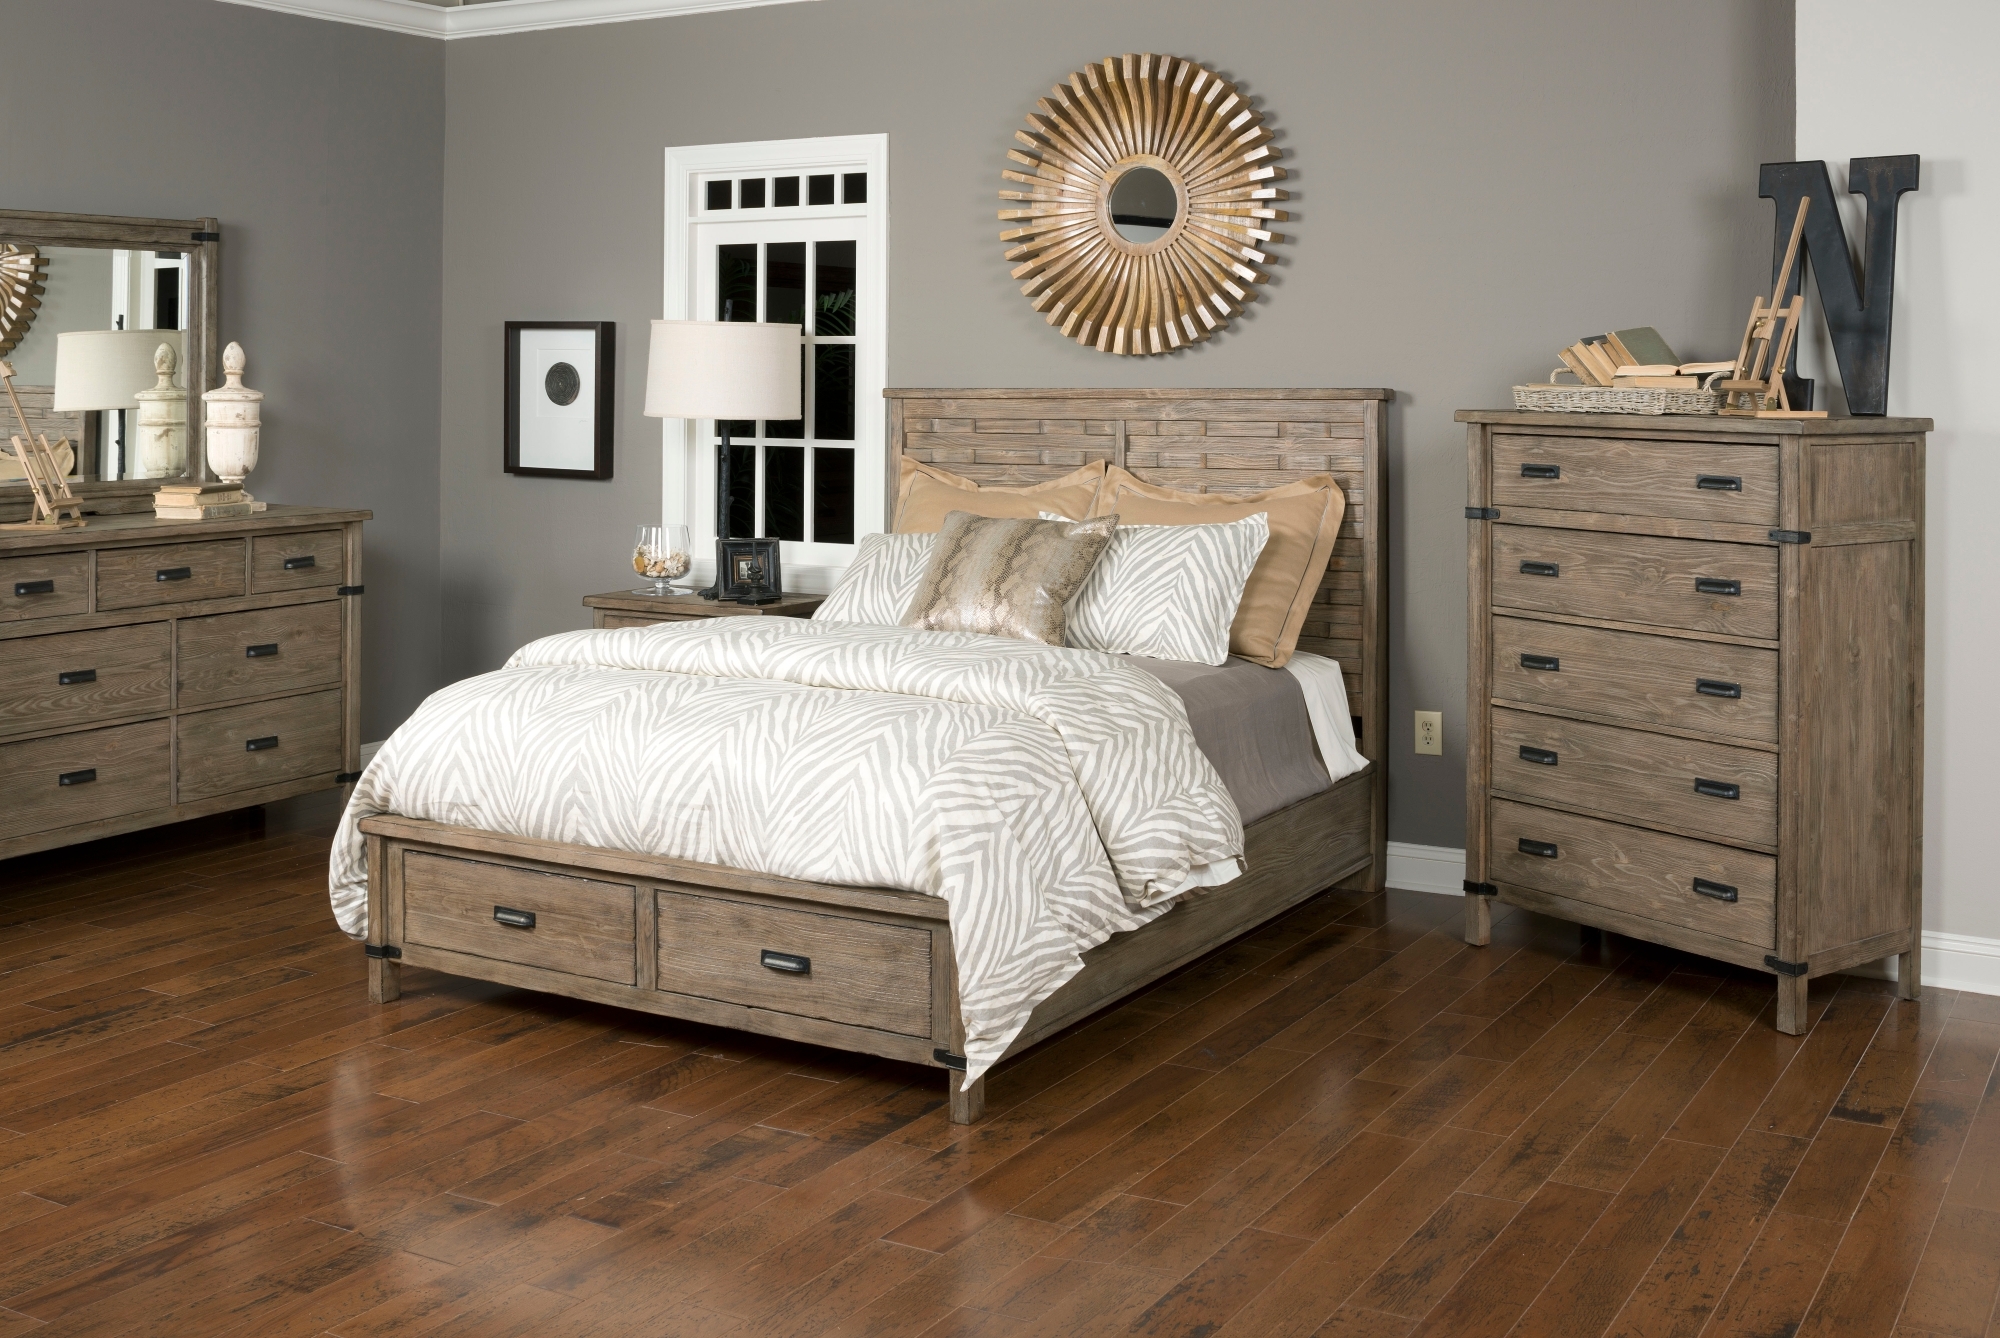 Kincaid Foundry Bedroom Collection